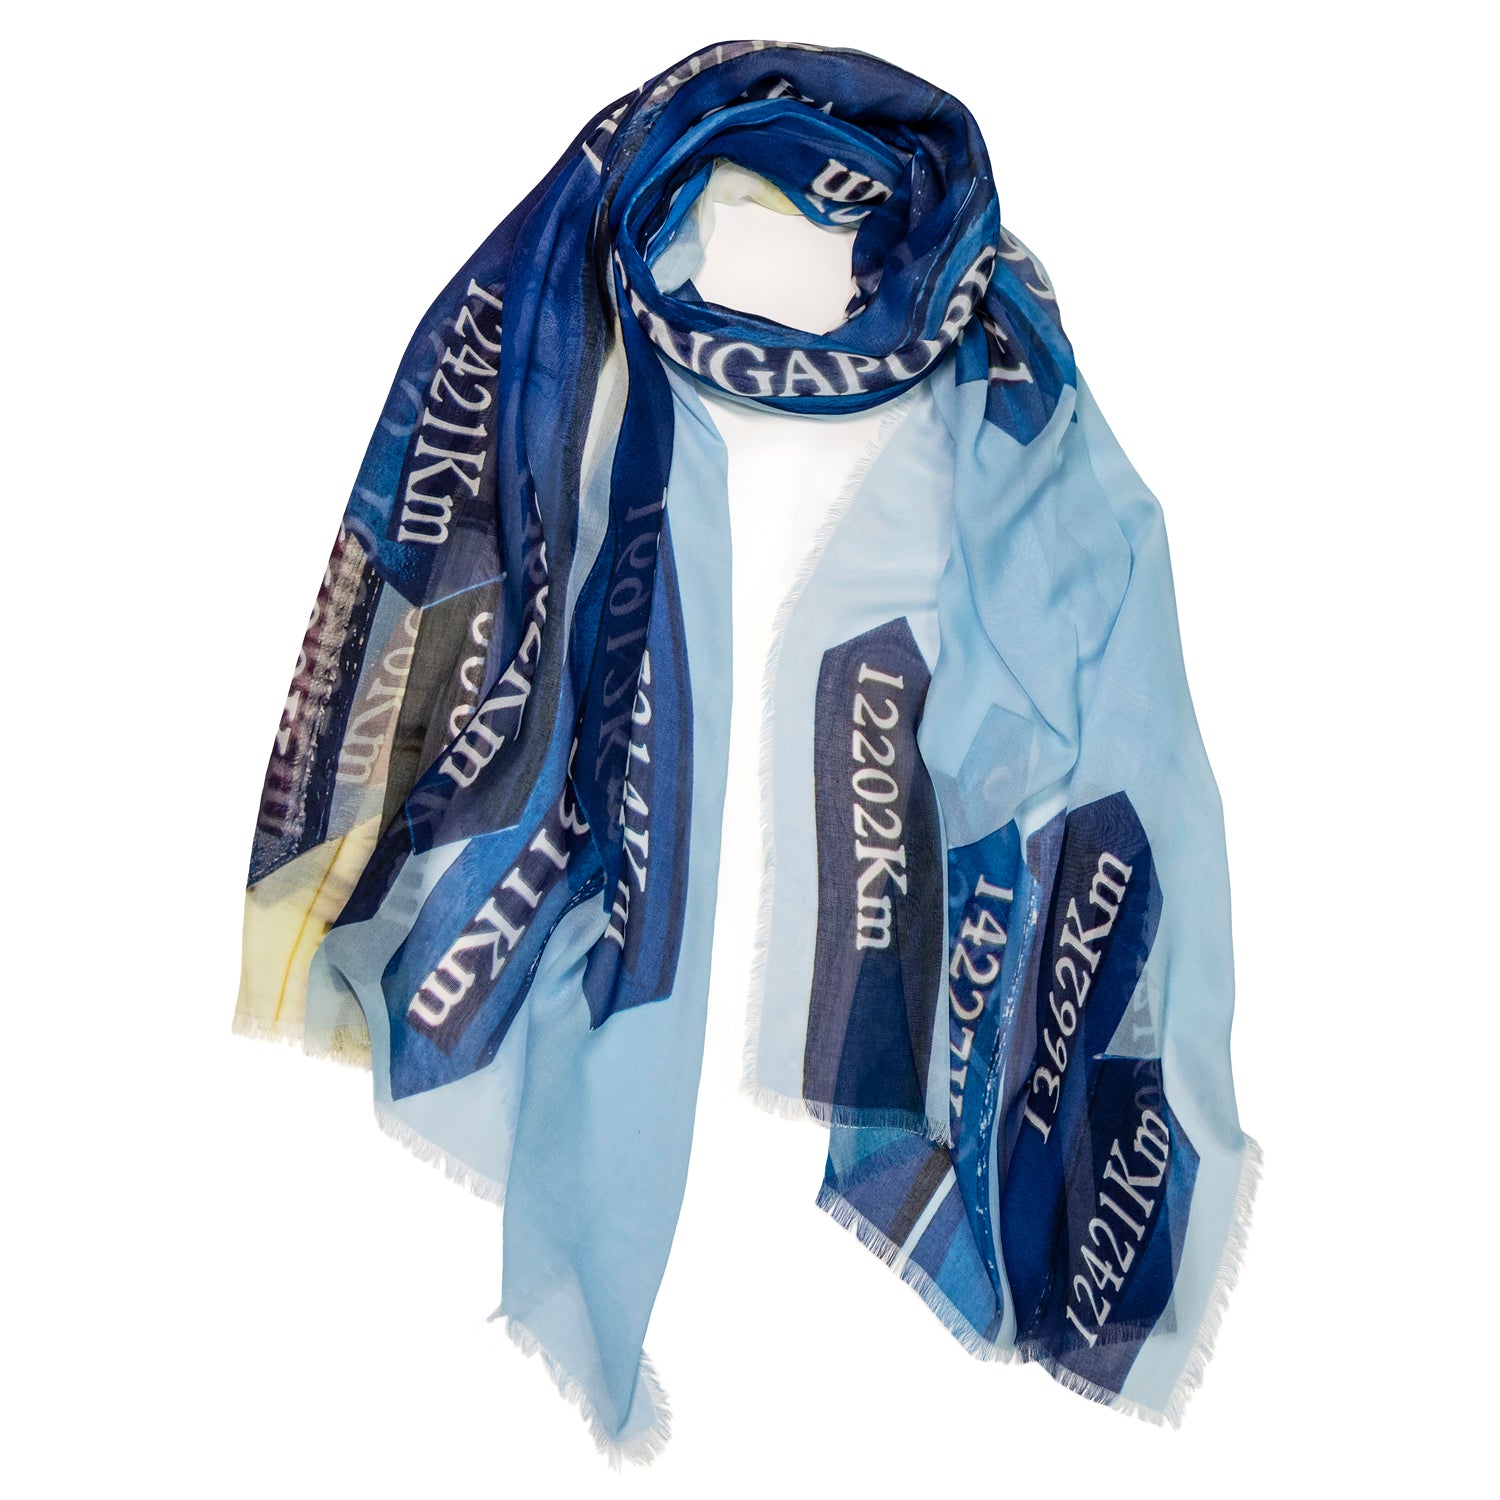 lets travel blue scarf accessory by seahorse silks